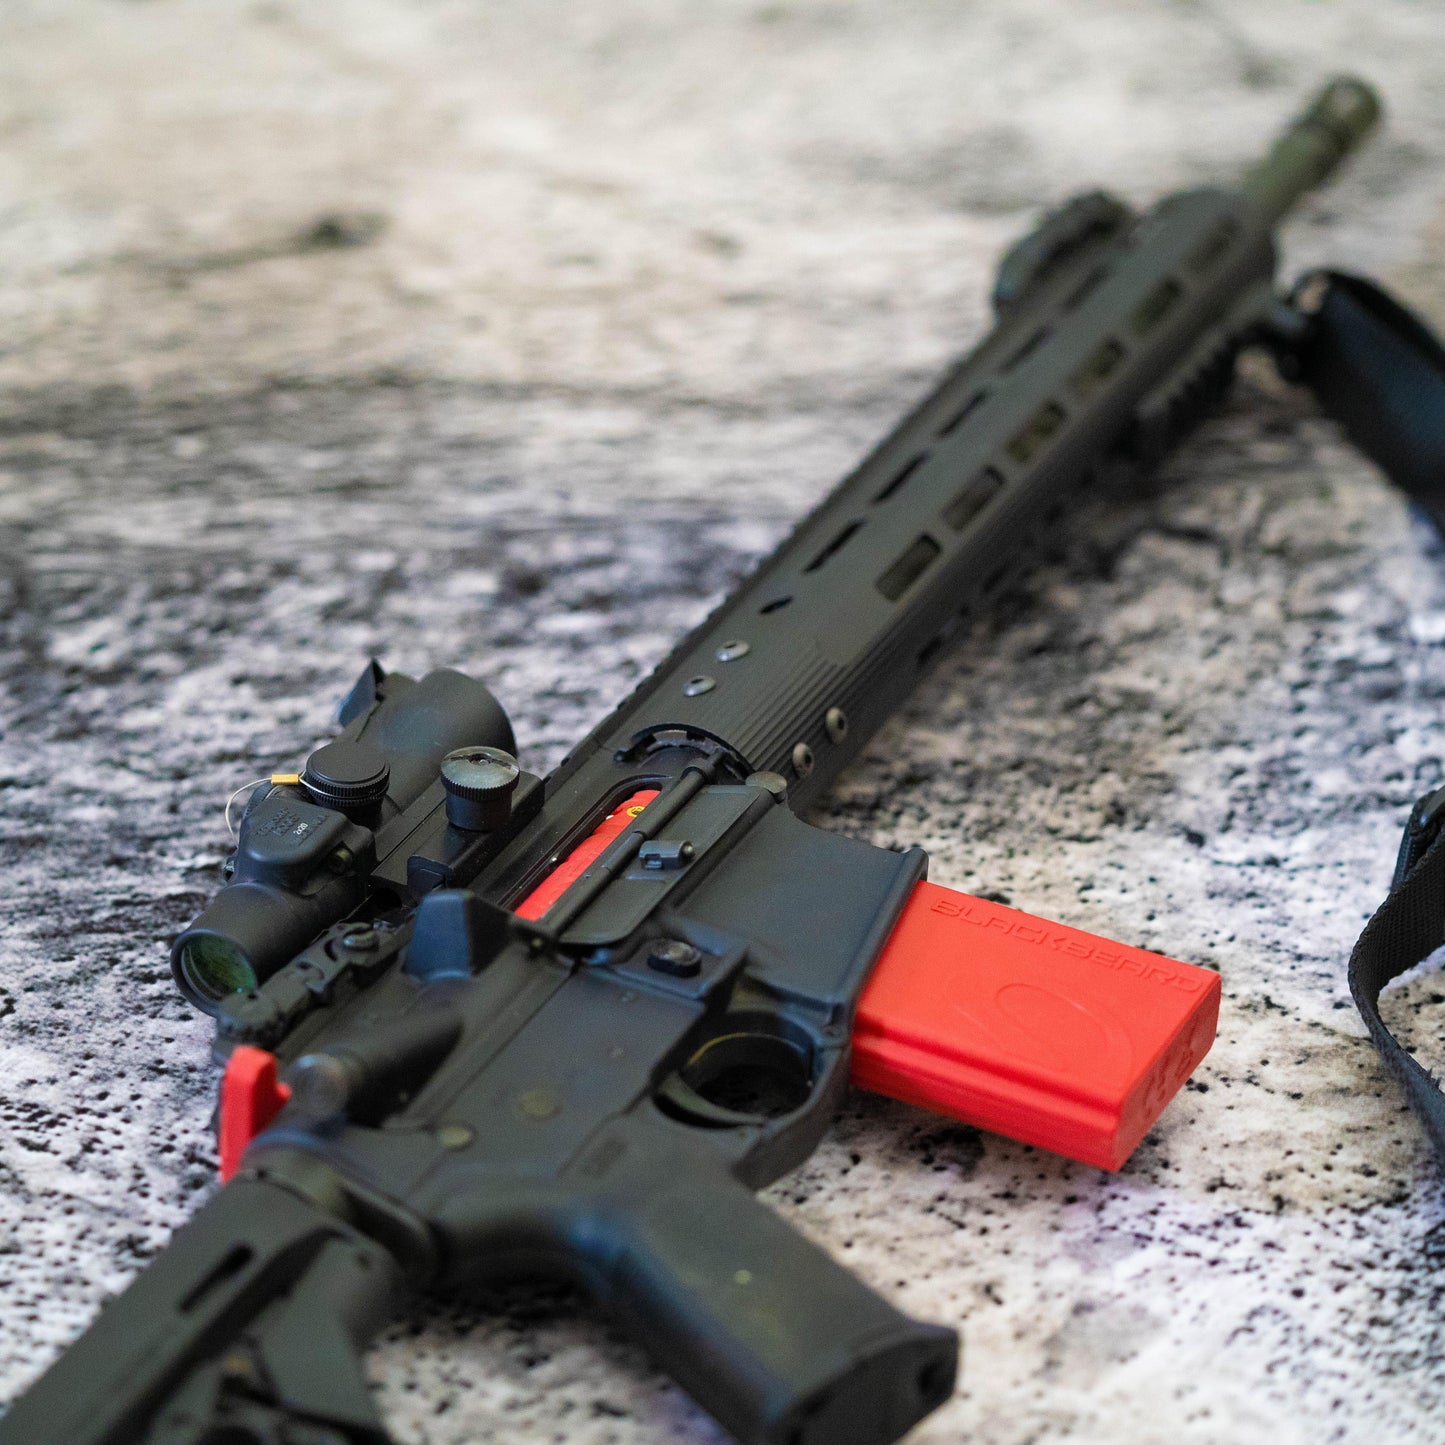 THE AR-15 AUTO-RESETTING TRIGGER SYSTEM